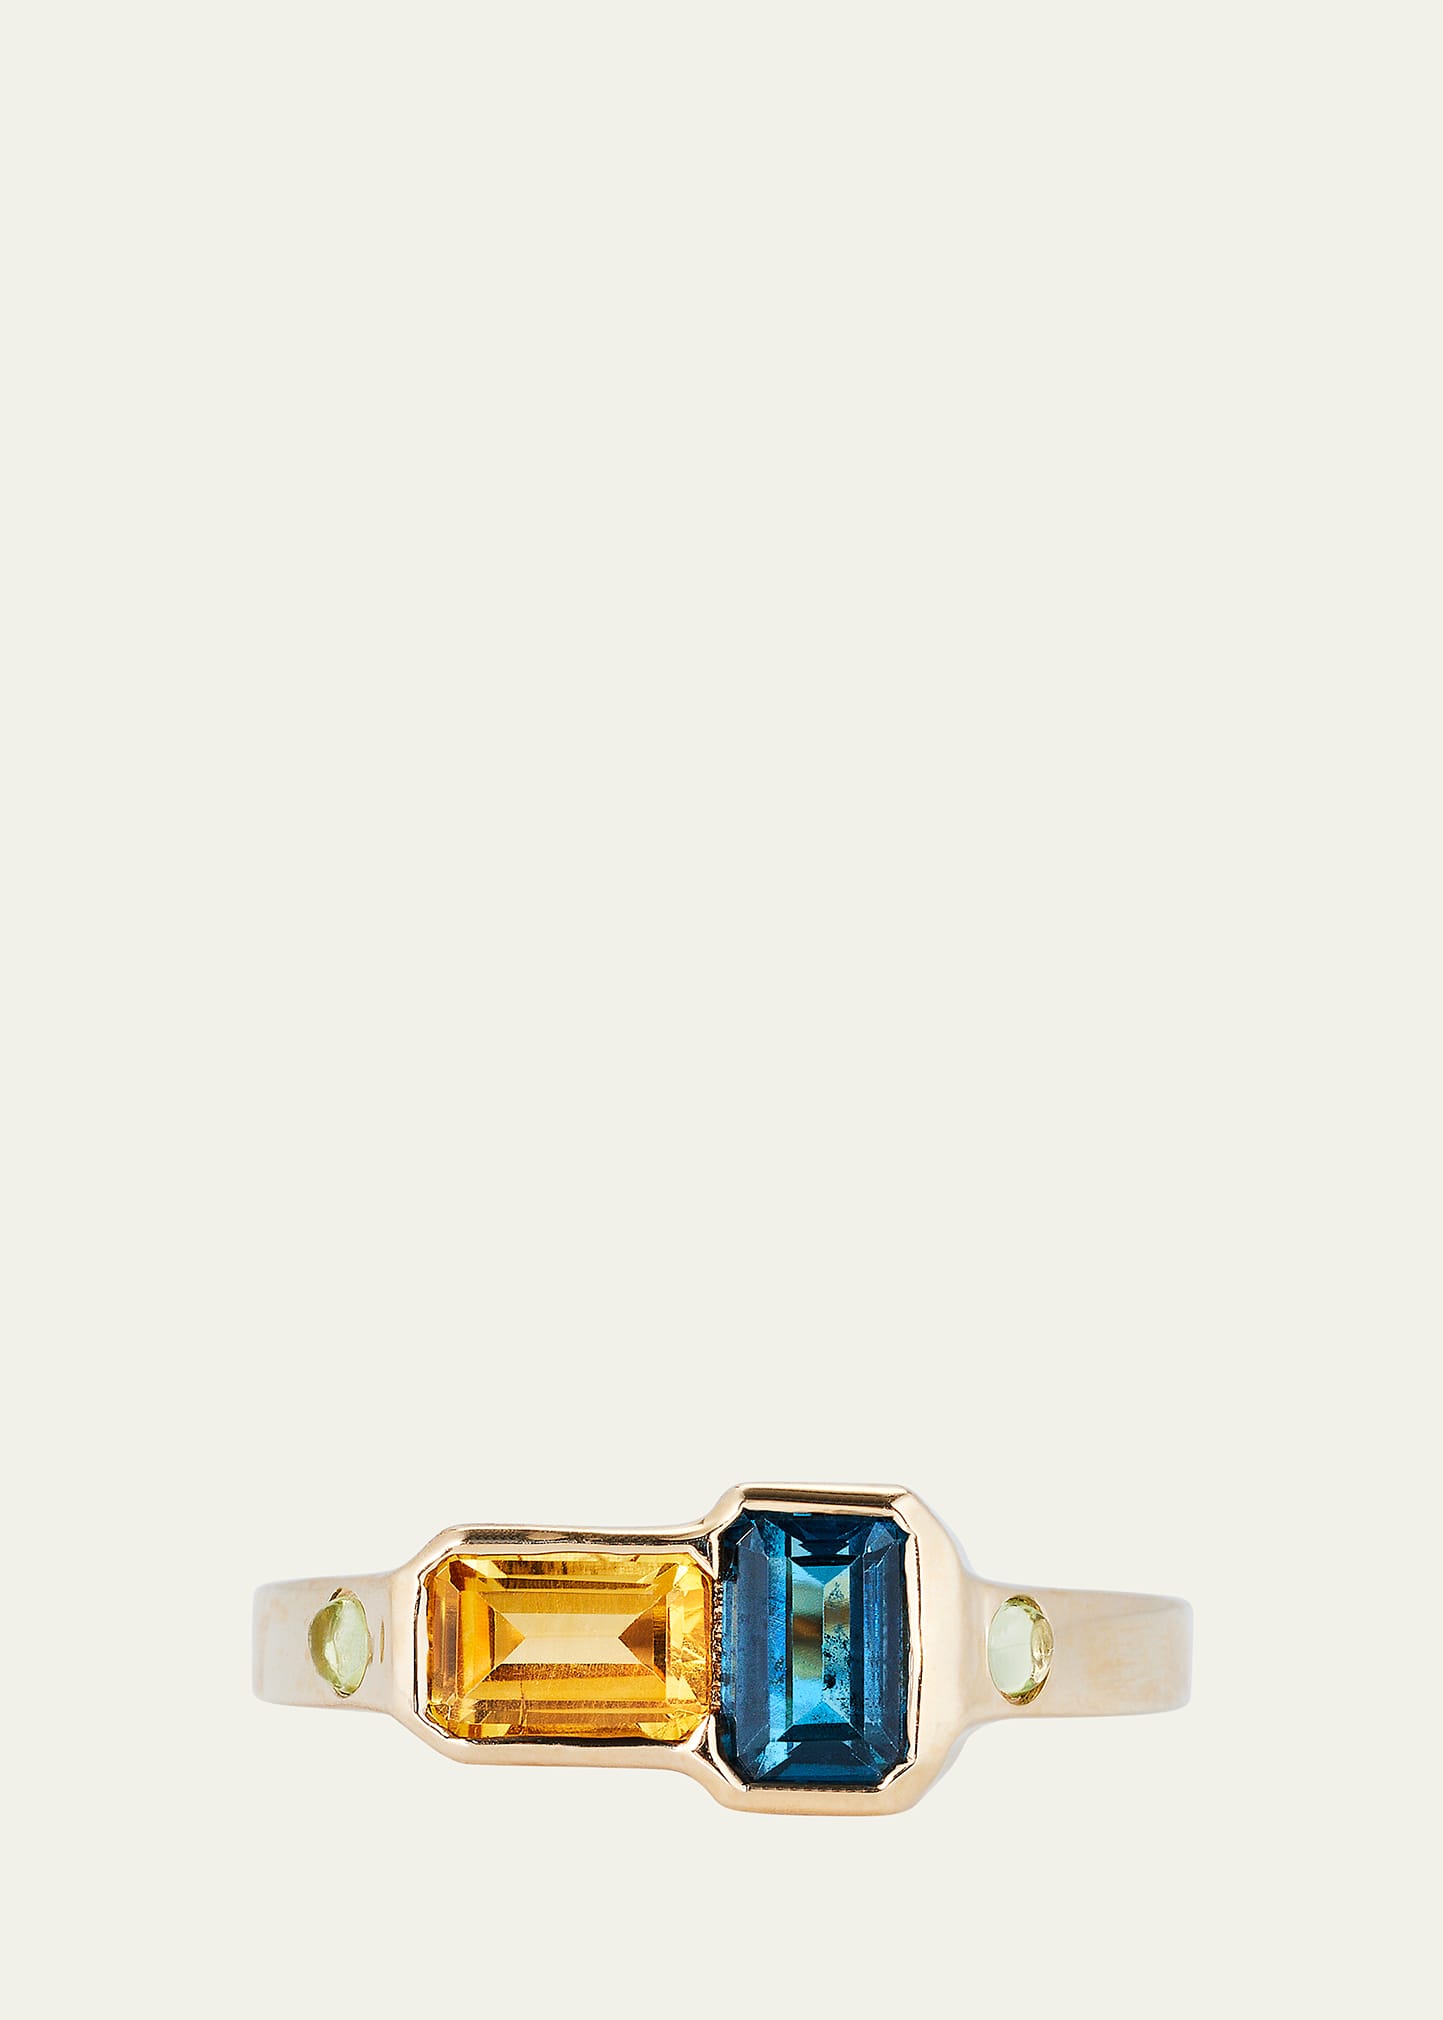 14k Gold Orb Blue Topaz and Citrine Ring with Peridot Cabochons